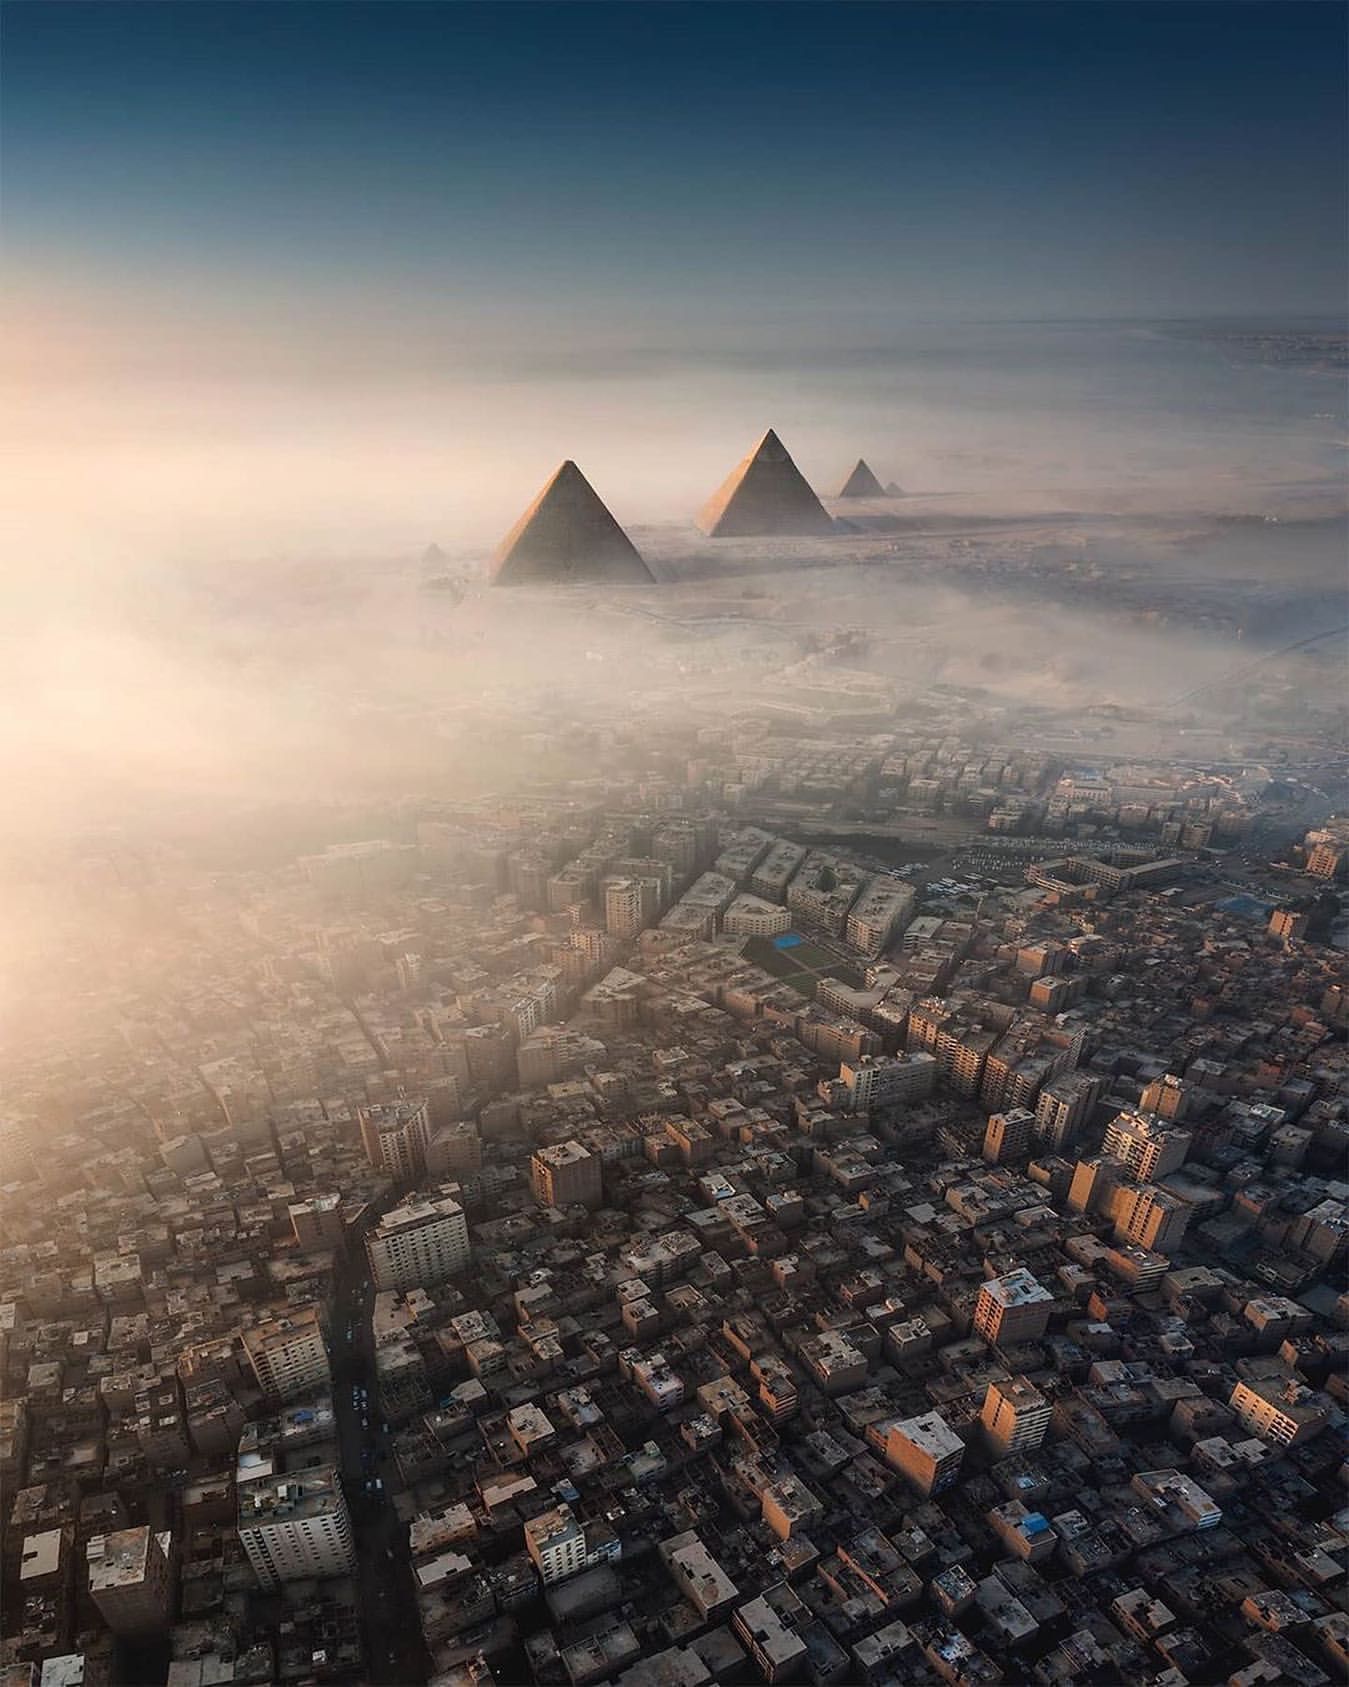 Phone Wallpaper Cairo And The Pyramids Of Giza In